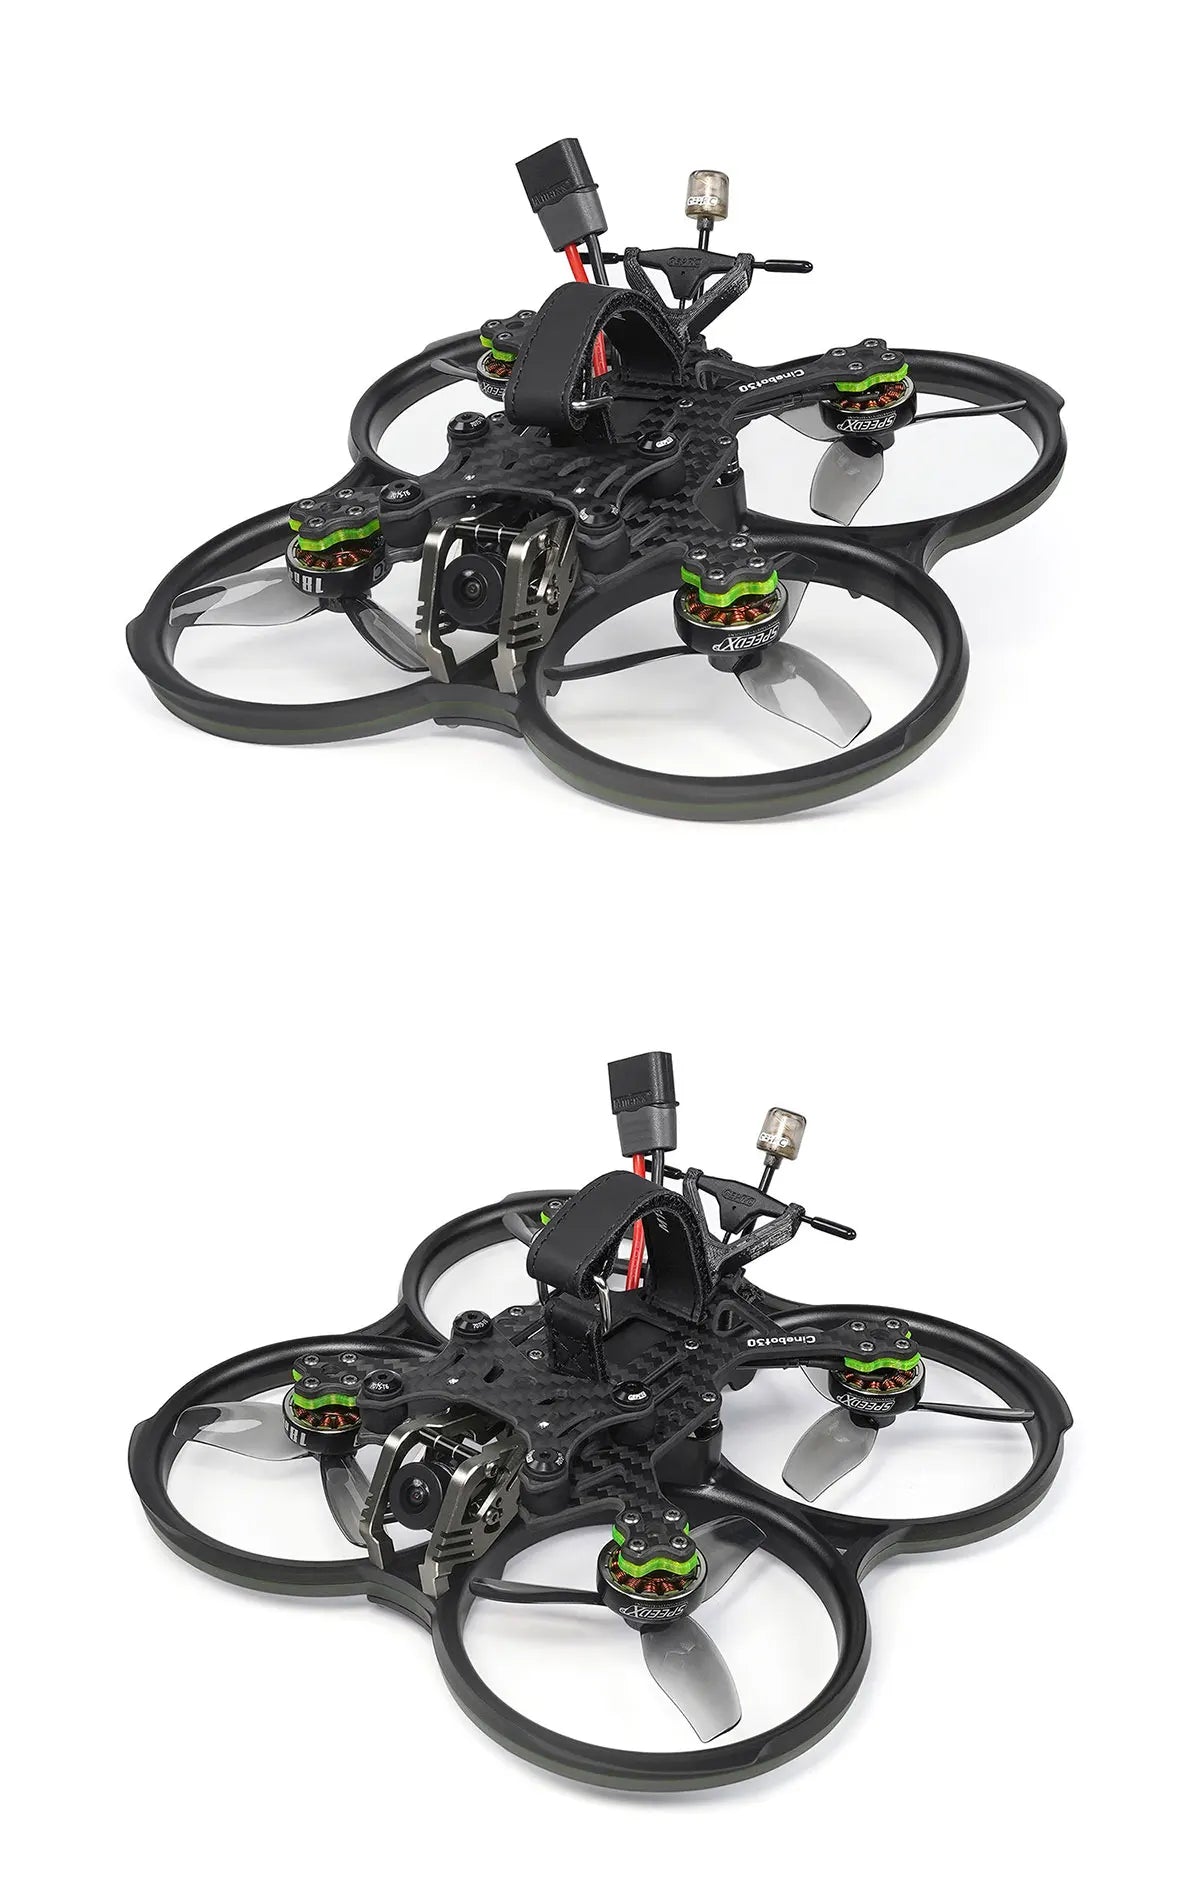 GEPRC Cinebot30 FPV Drone, this allows pilots to explore greater distances without signal loss